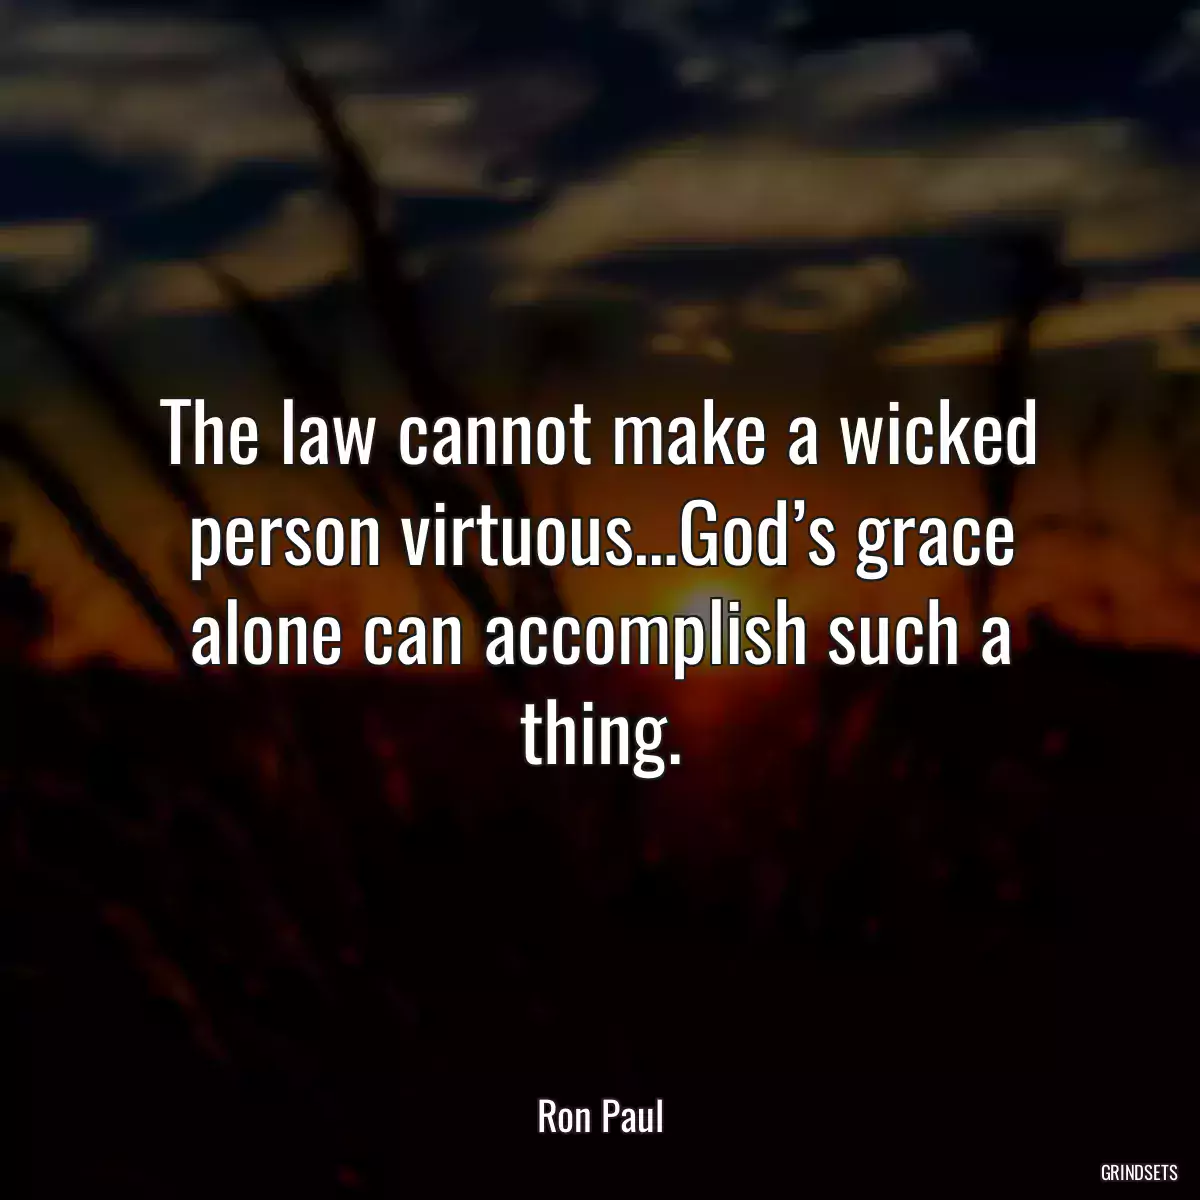 The law cannot make a wicked person virtuous…God’s grace alone can accomplish such a thing.